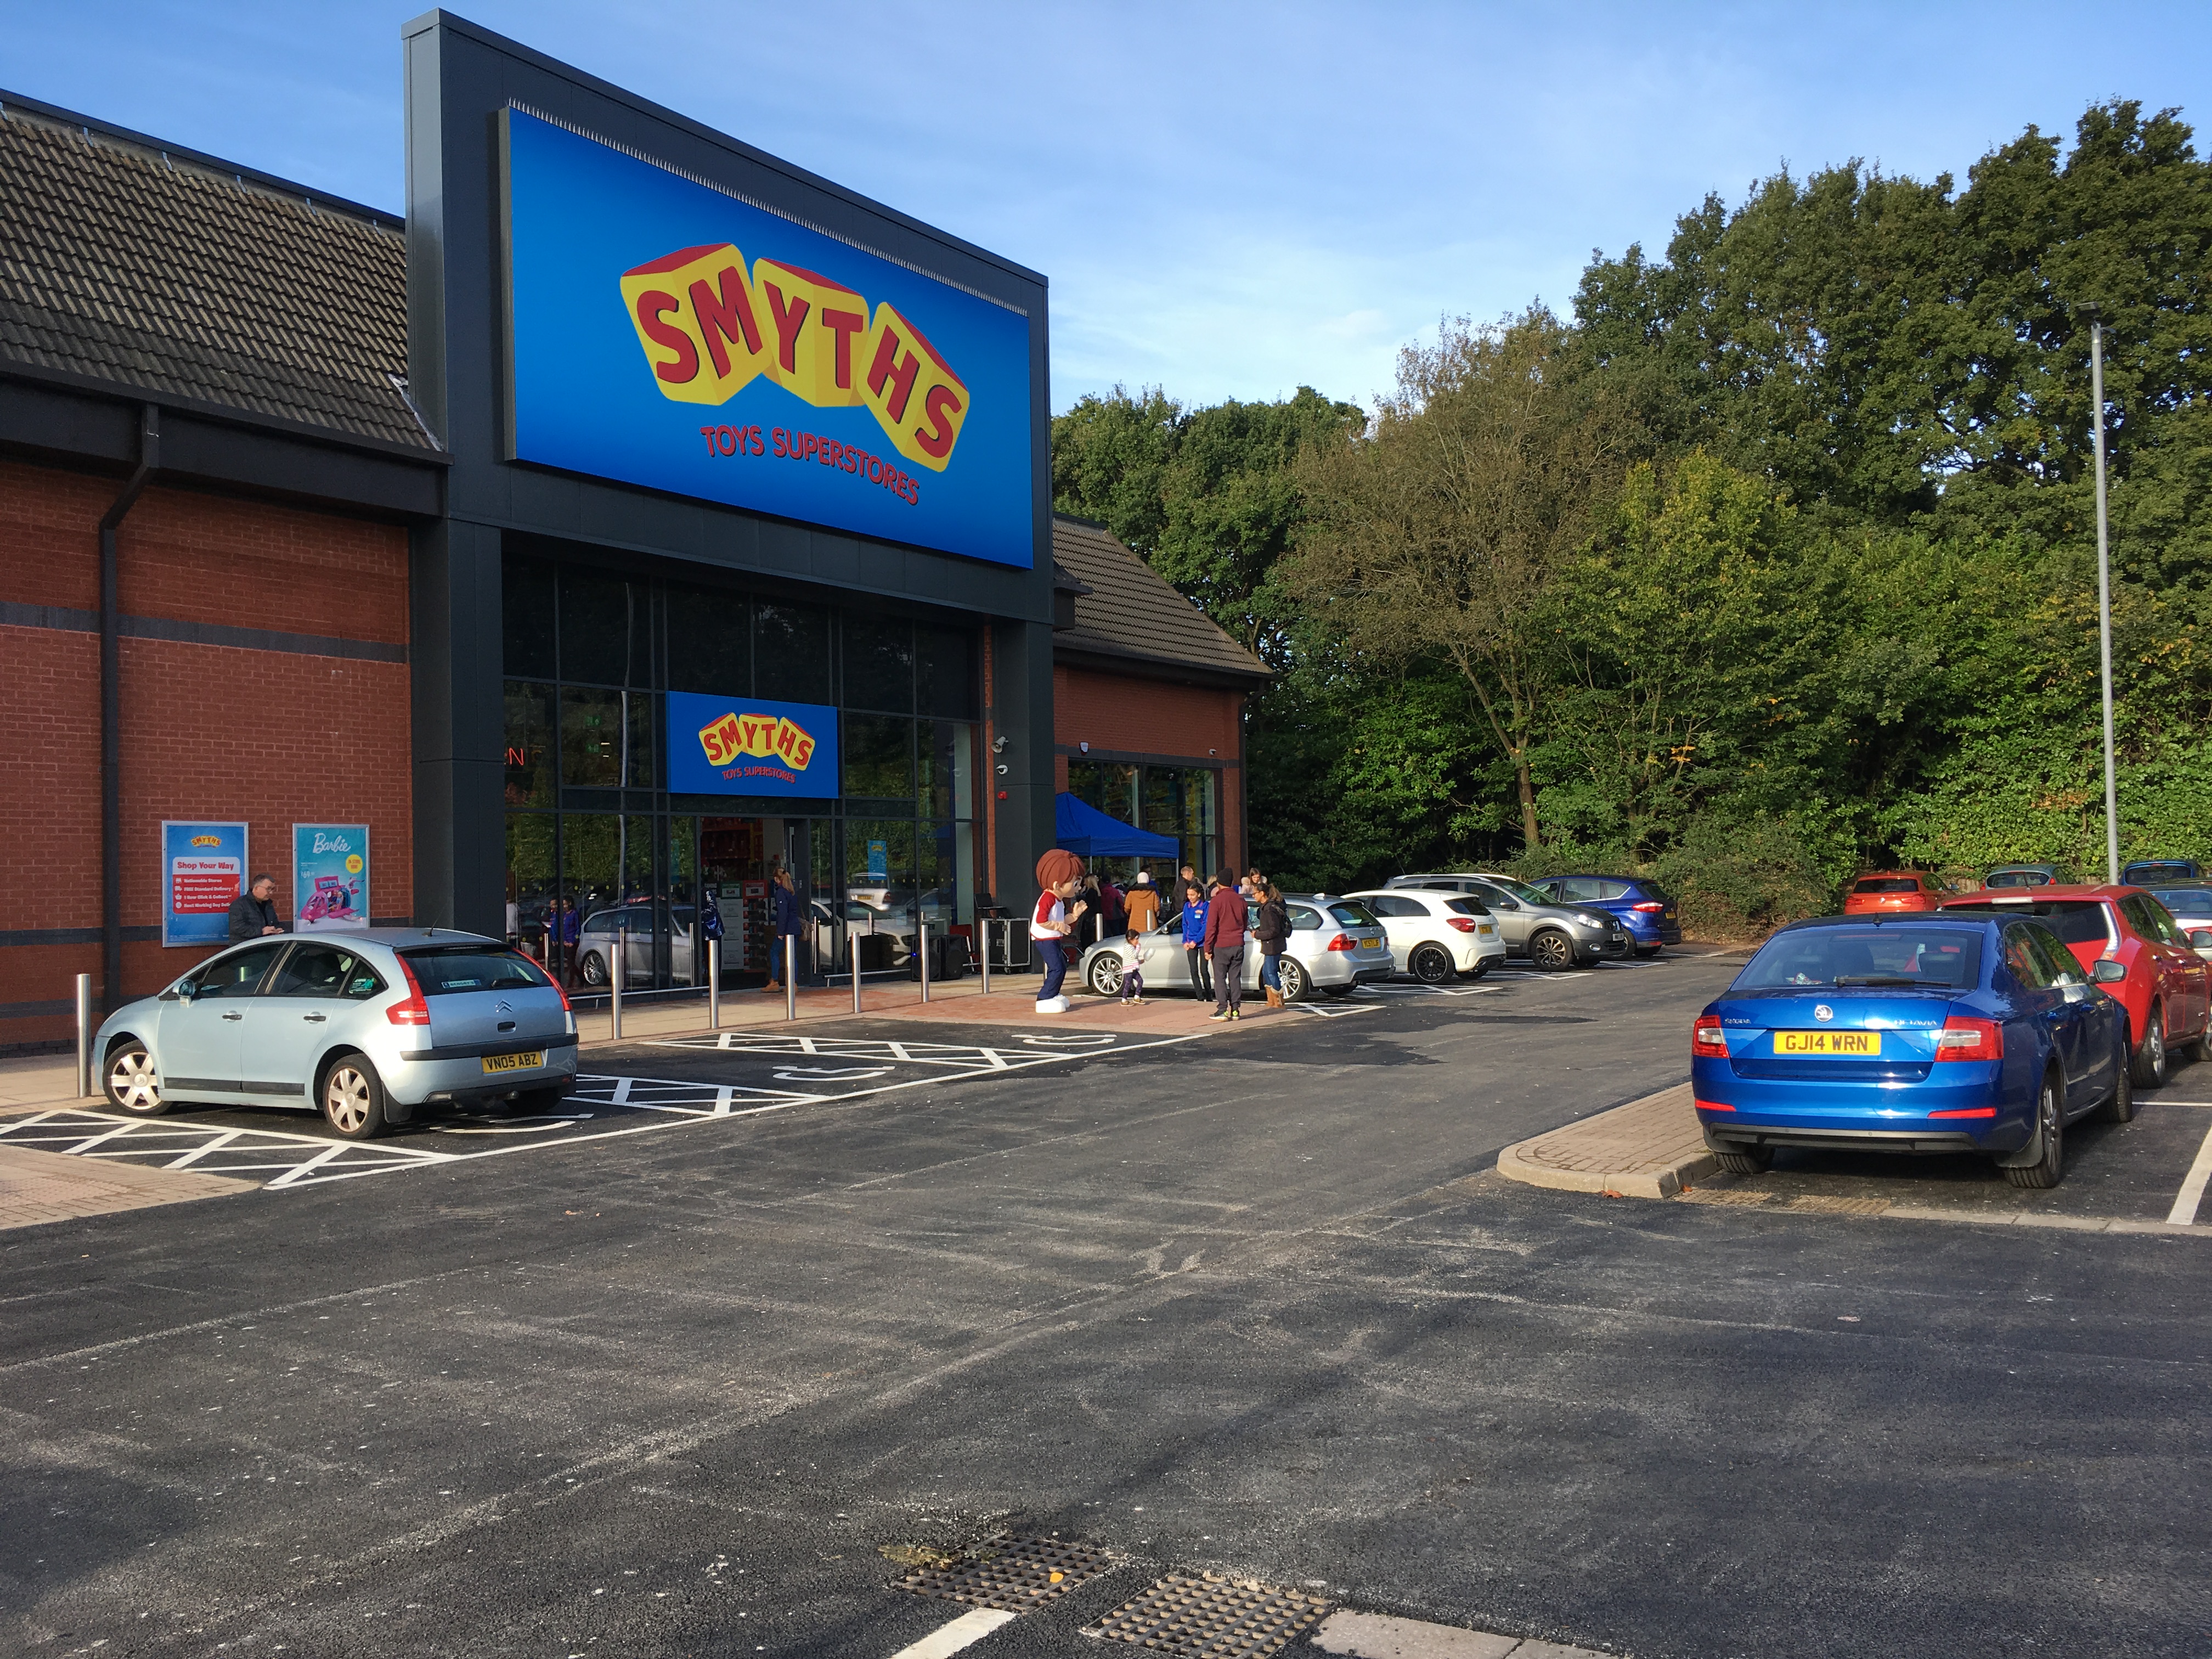 Smyths Toys move into former Toys R Us stores